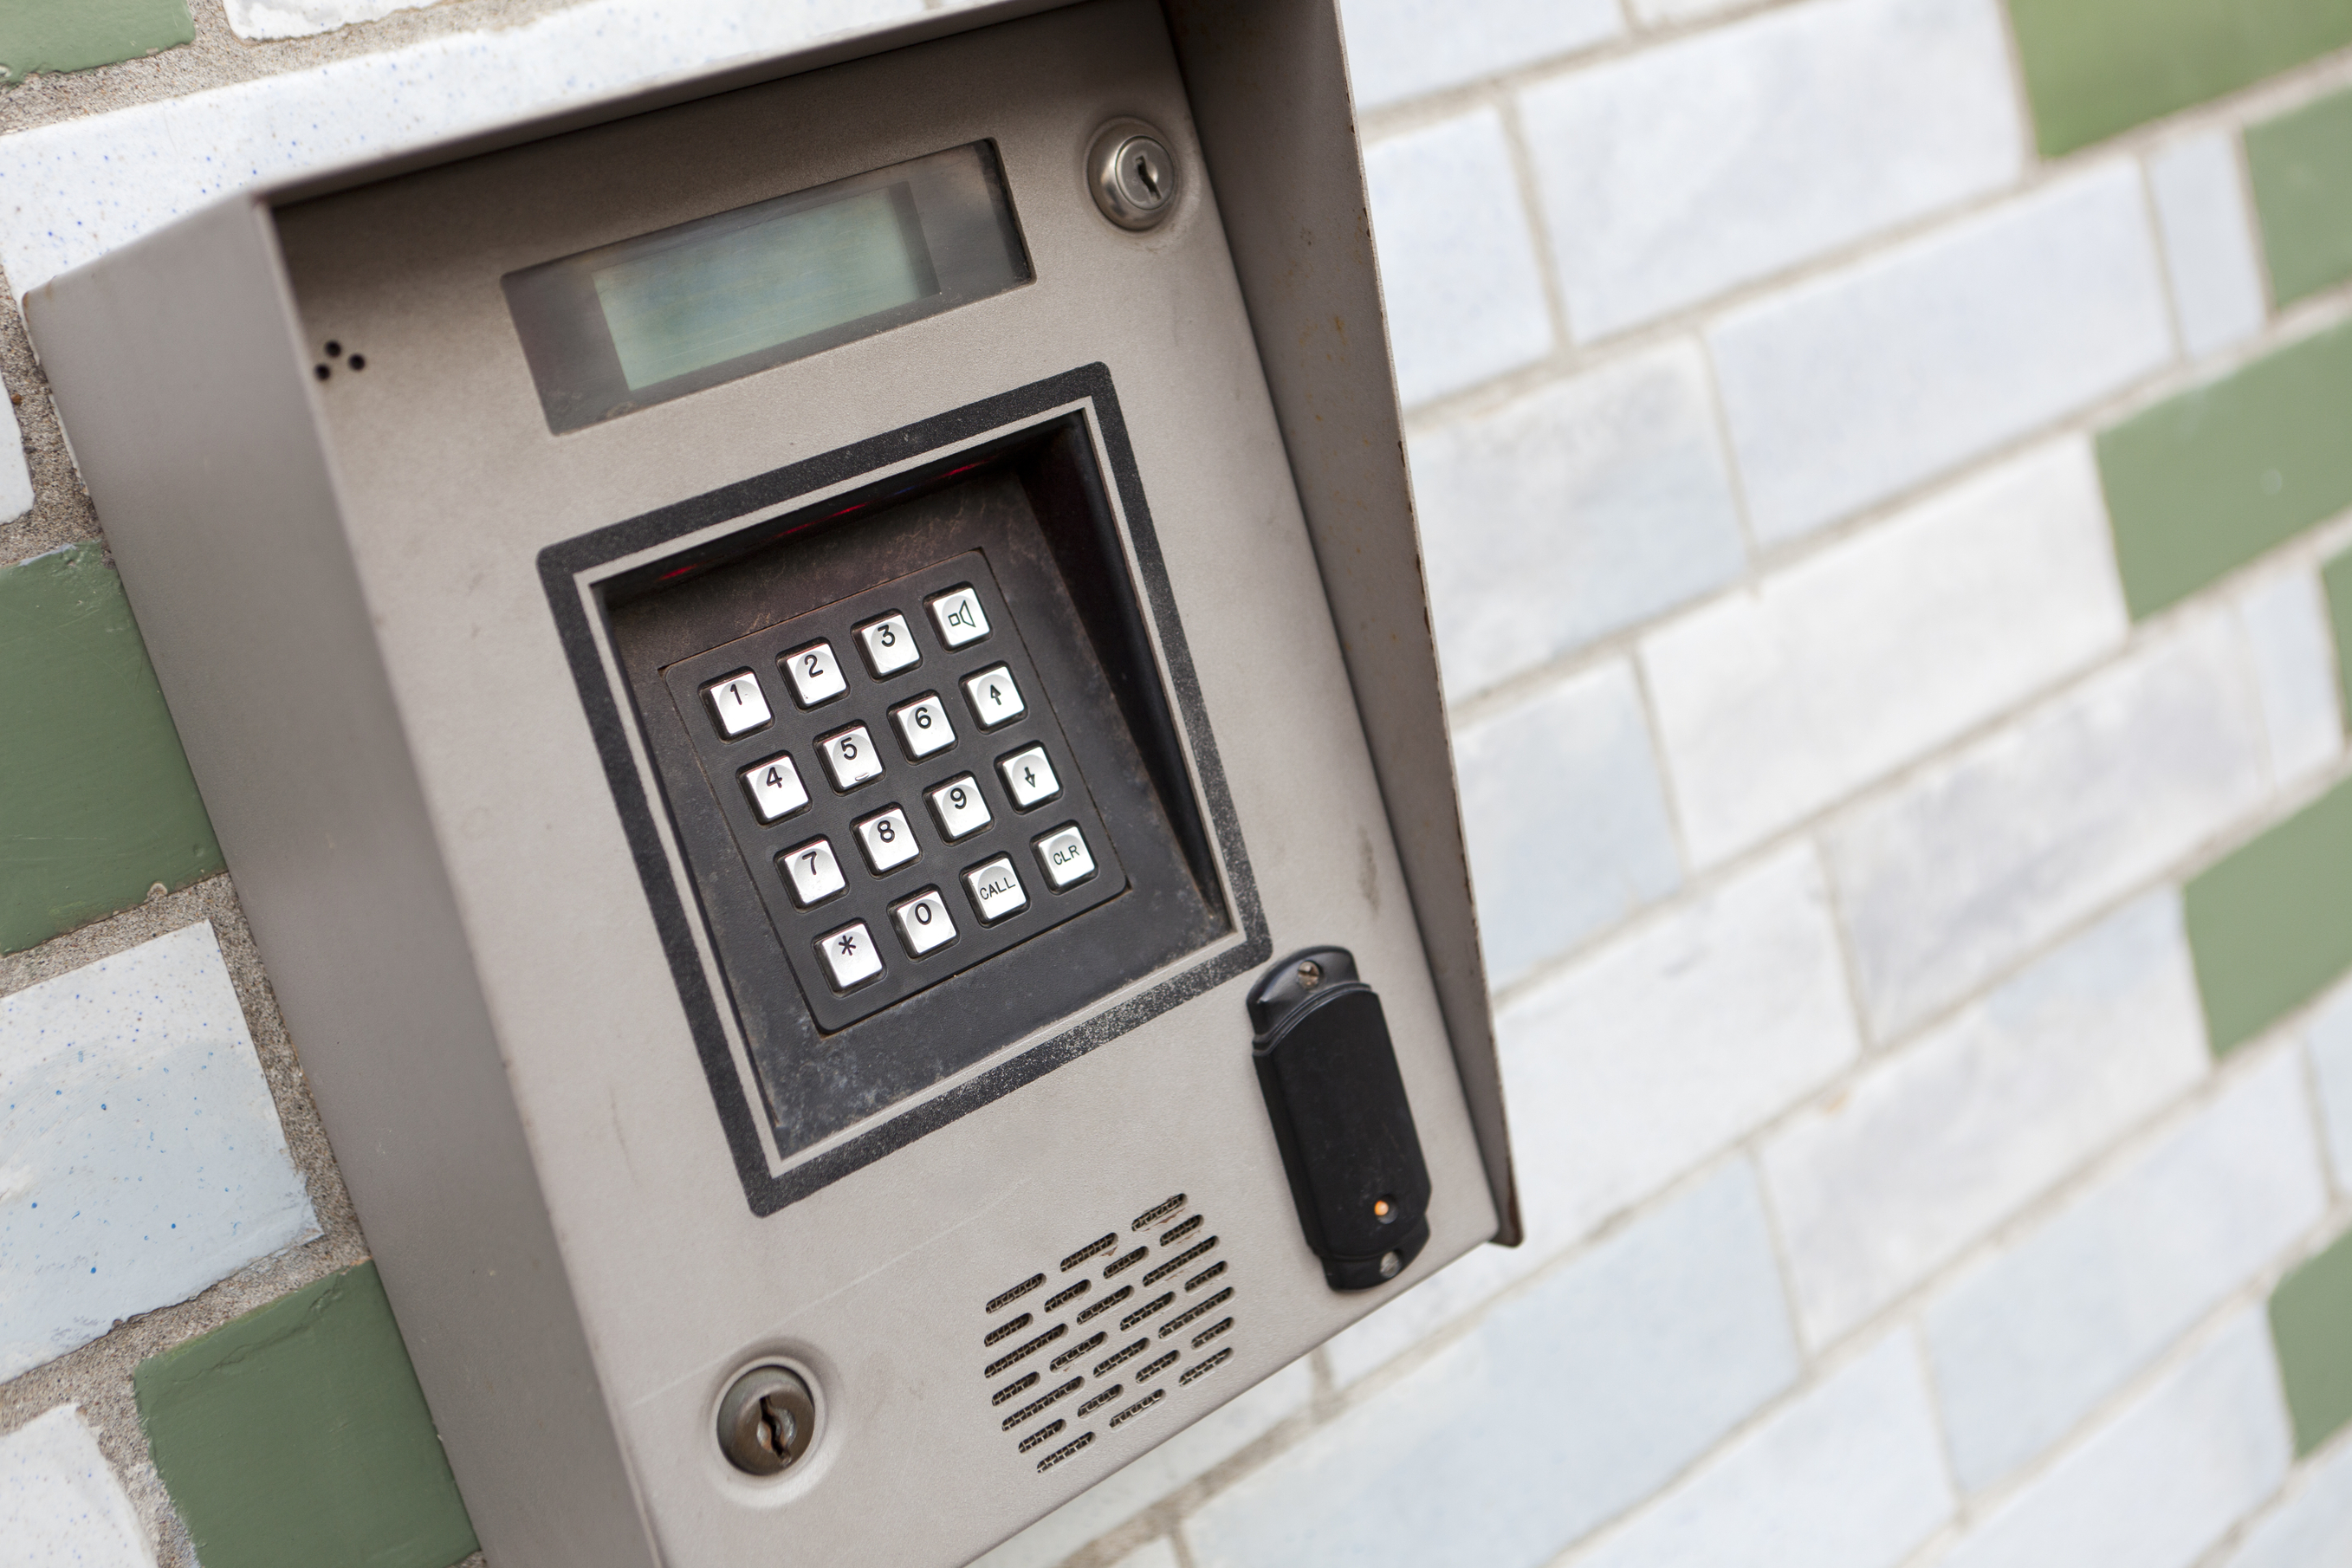 Security keypad used to restrict access unless a key code is known that can be used to allow entrance to the building.